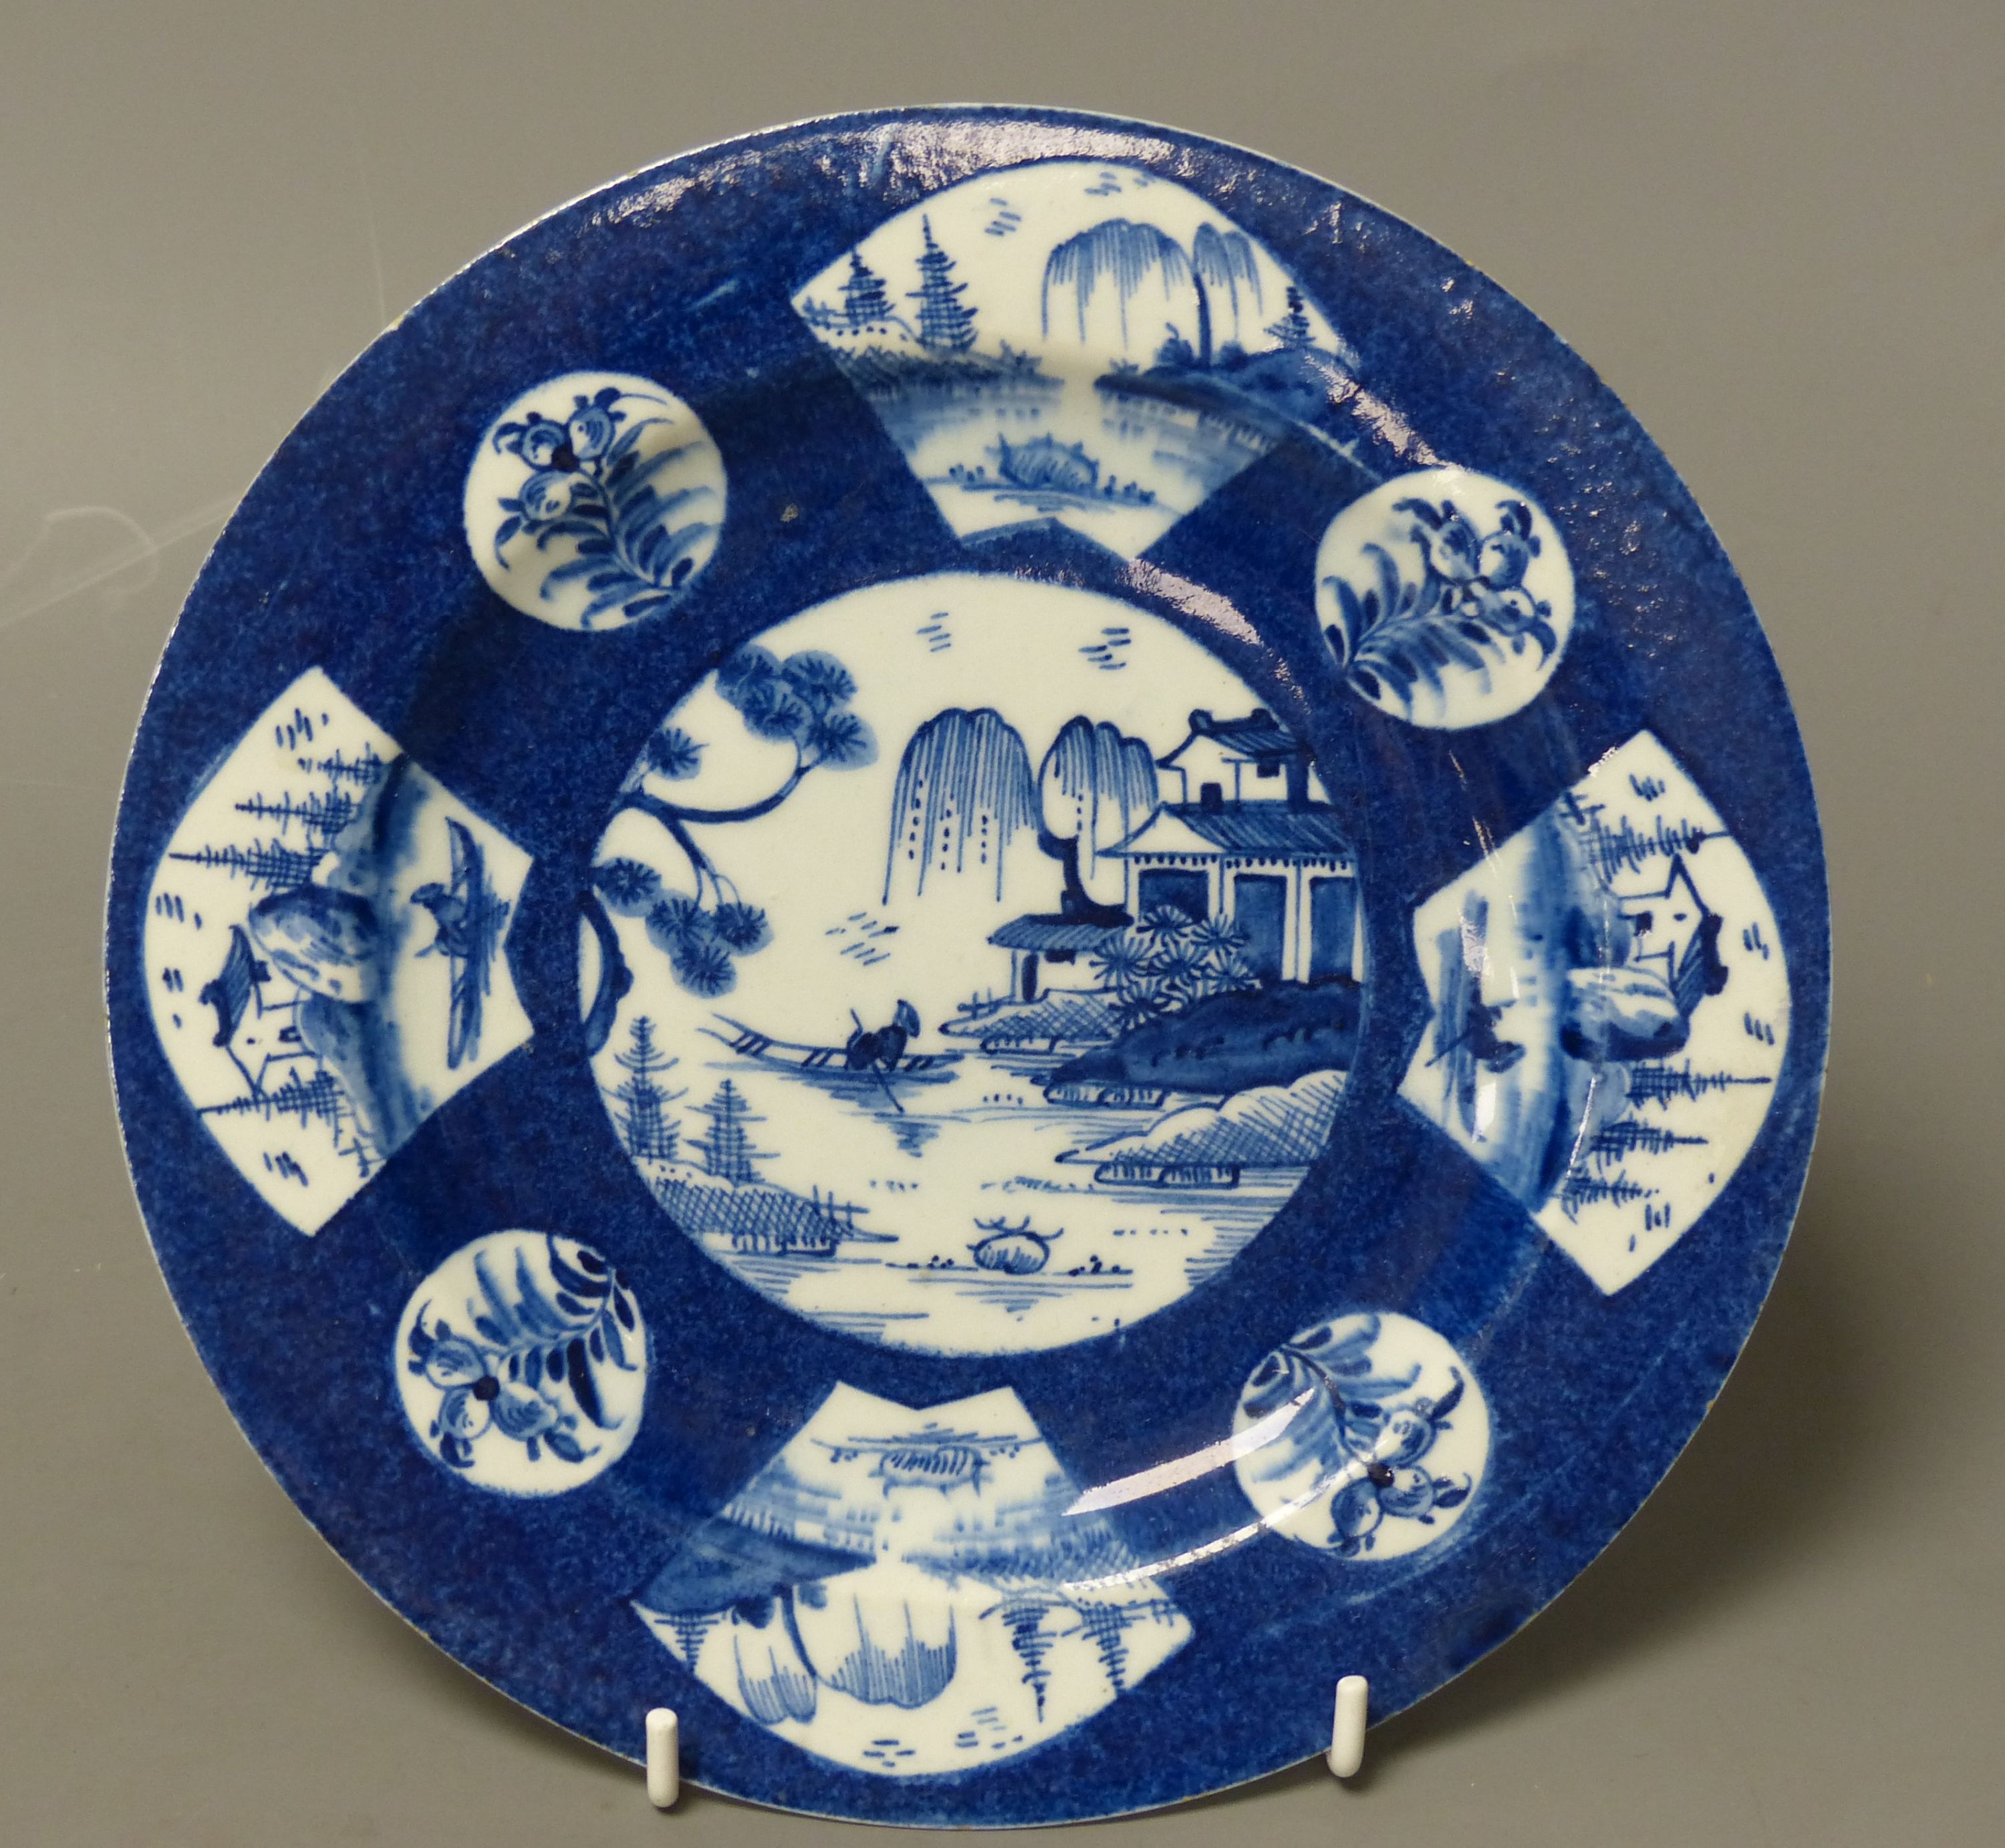 A Bow circular plate painted with landscapes, c.1757, six character mark, 20cm diameter